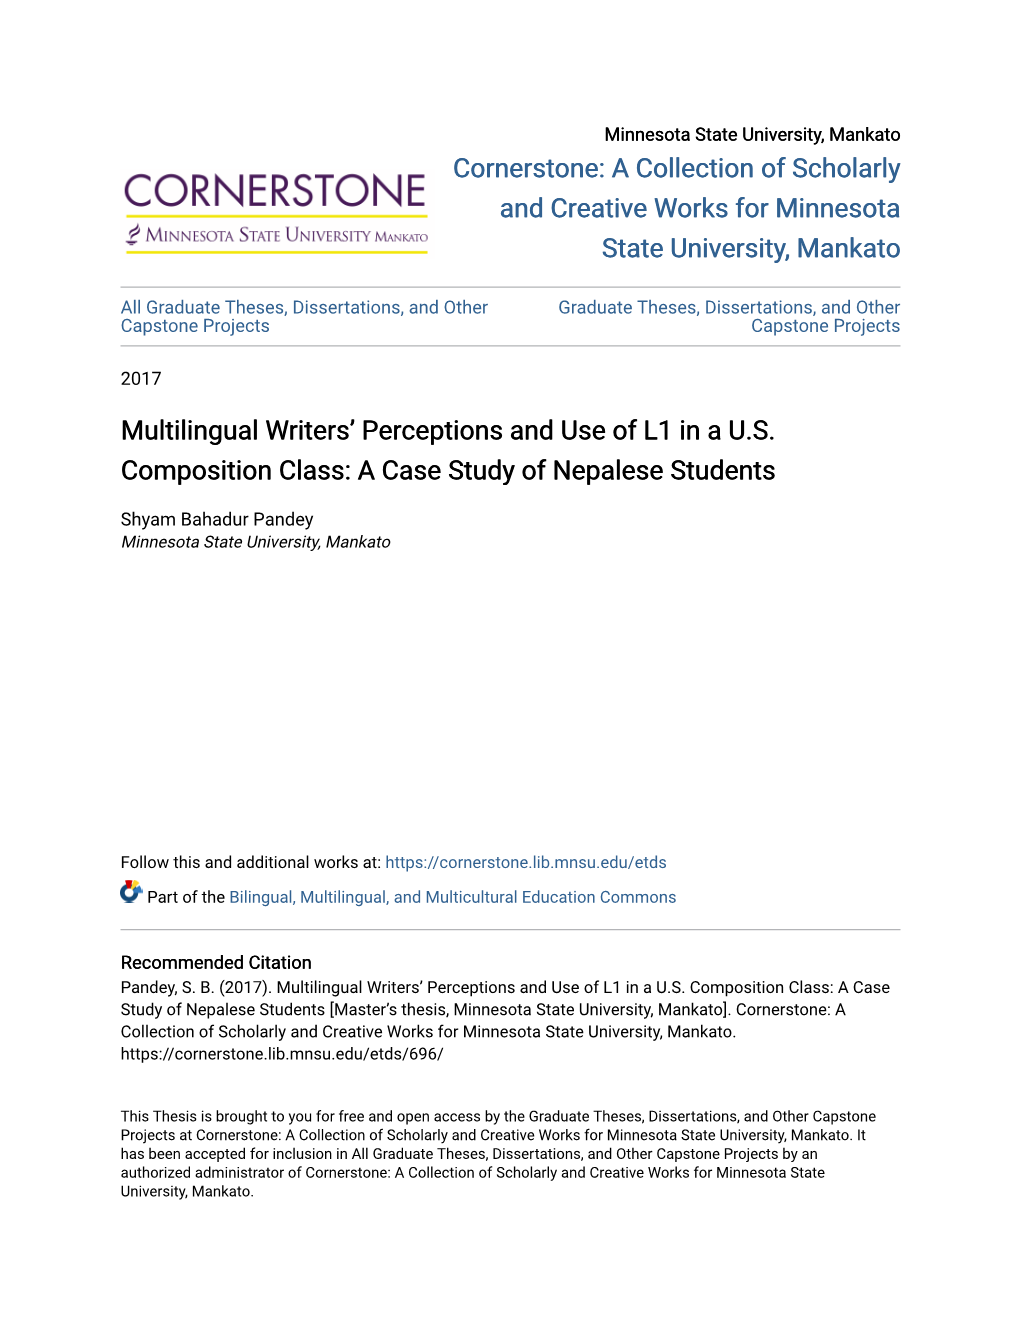 Multilingual Writers' Perceptions and Use of L1 in a U.S. Composition Class